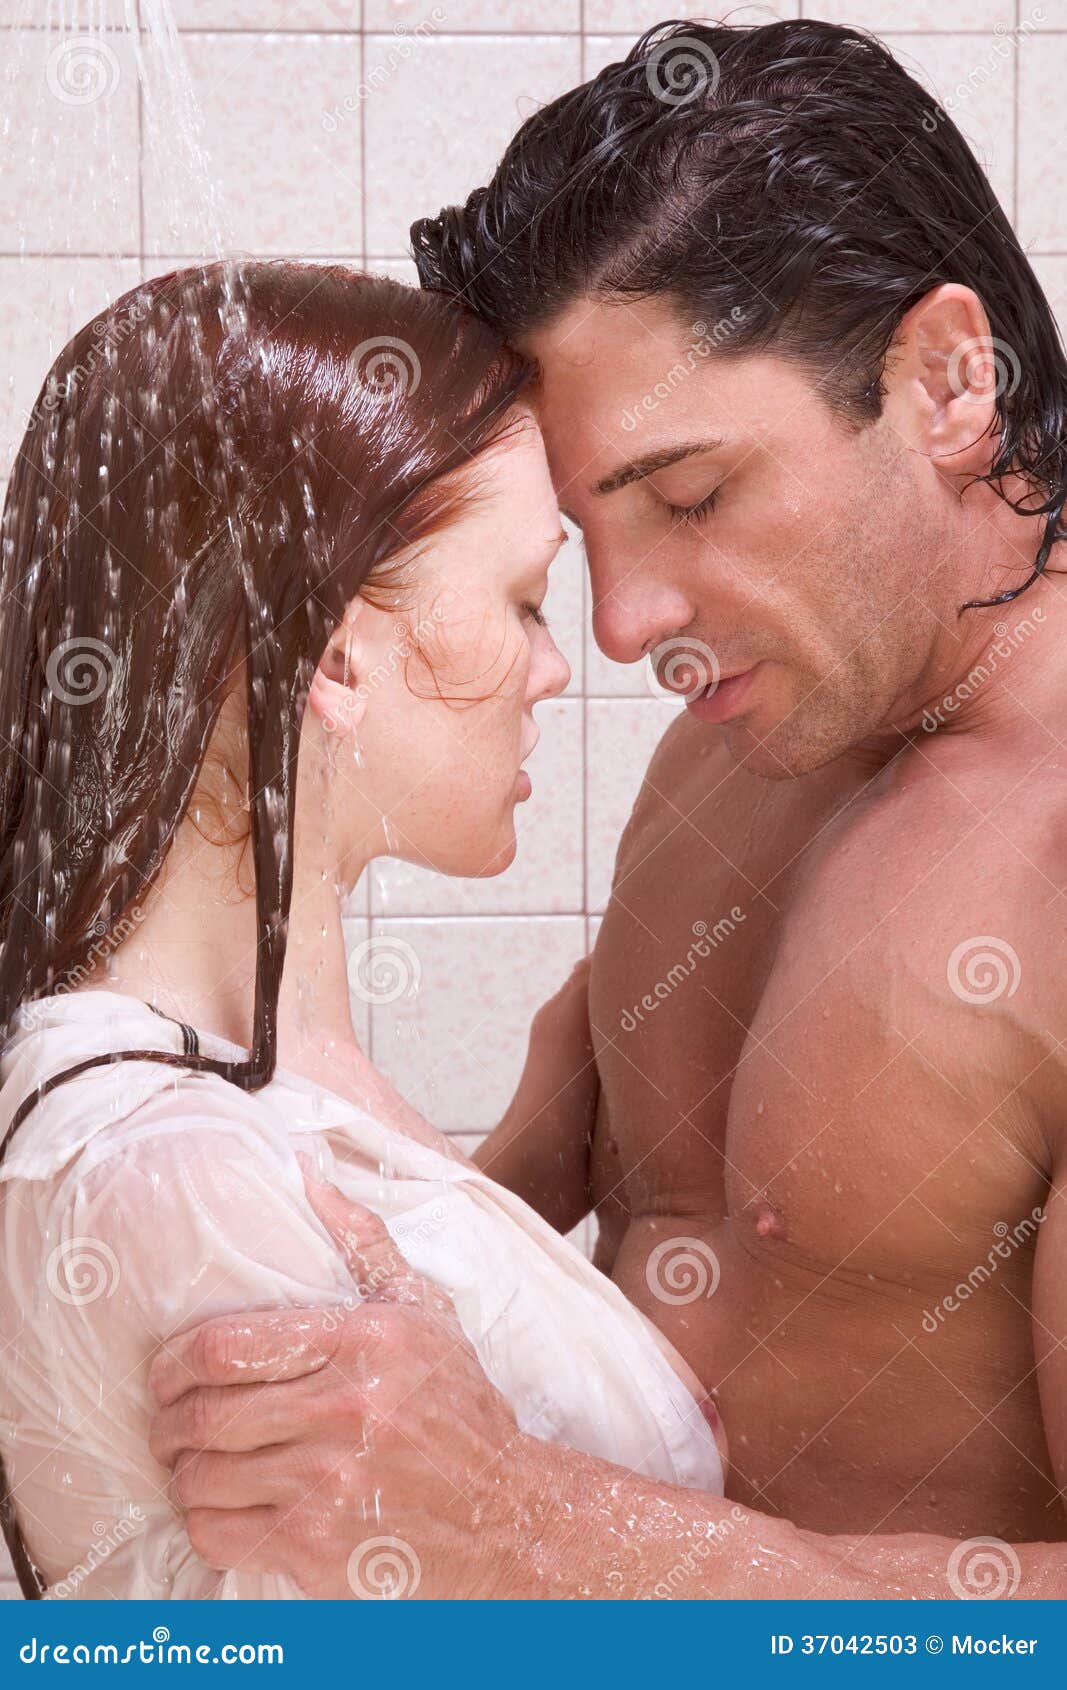 abdelrahman mahmod recommends people kissing in the shower pic